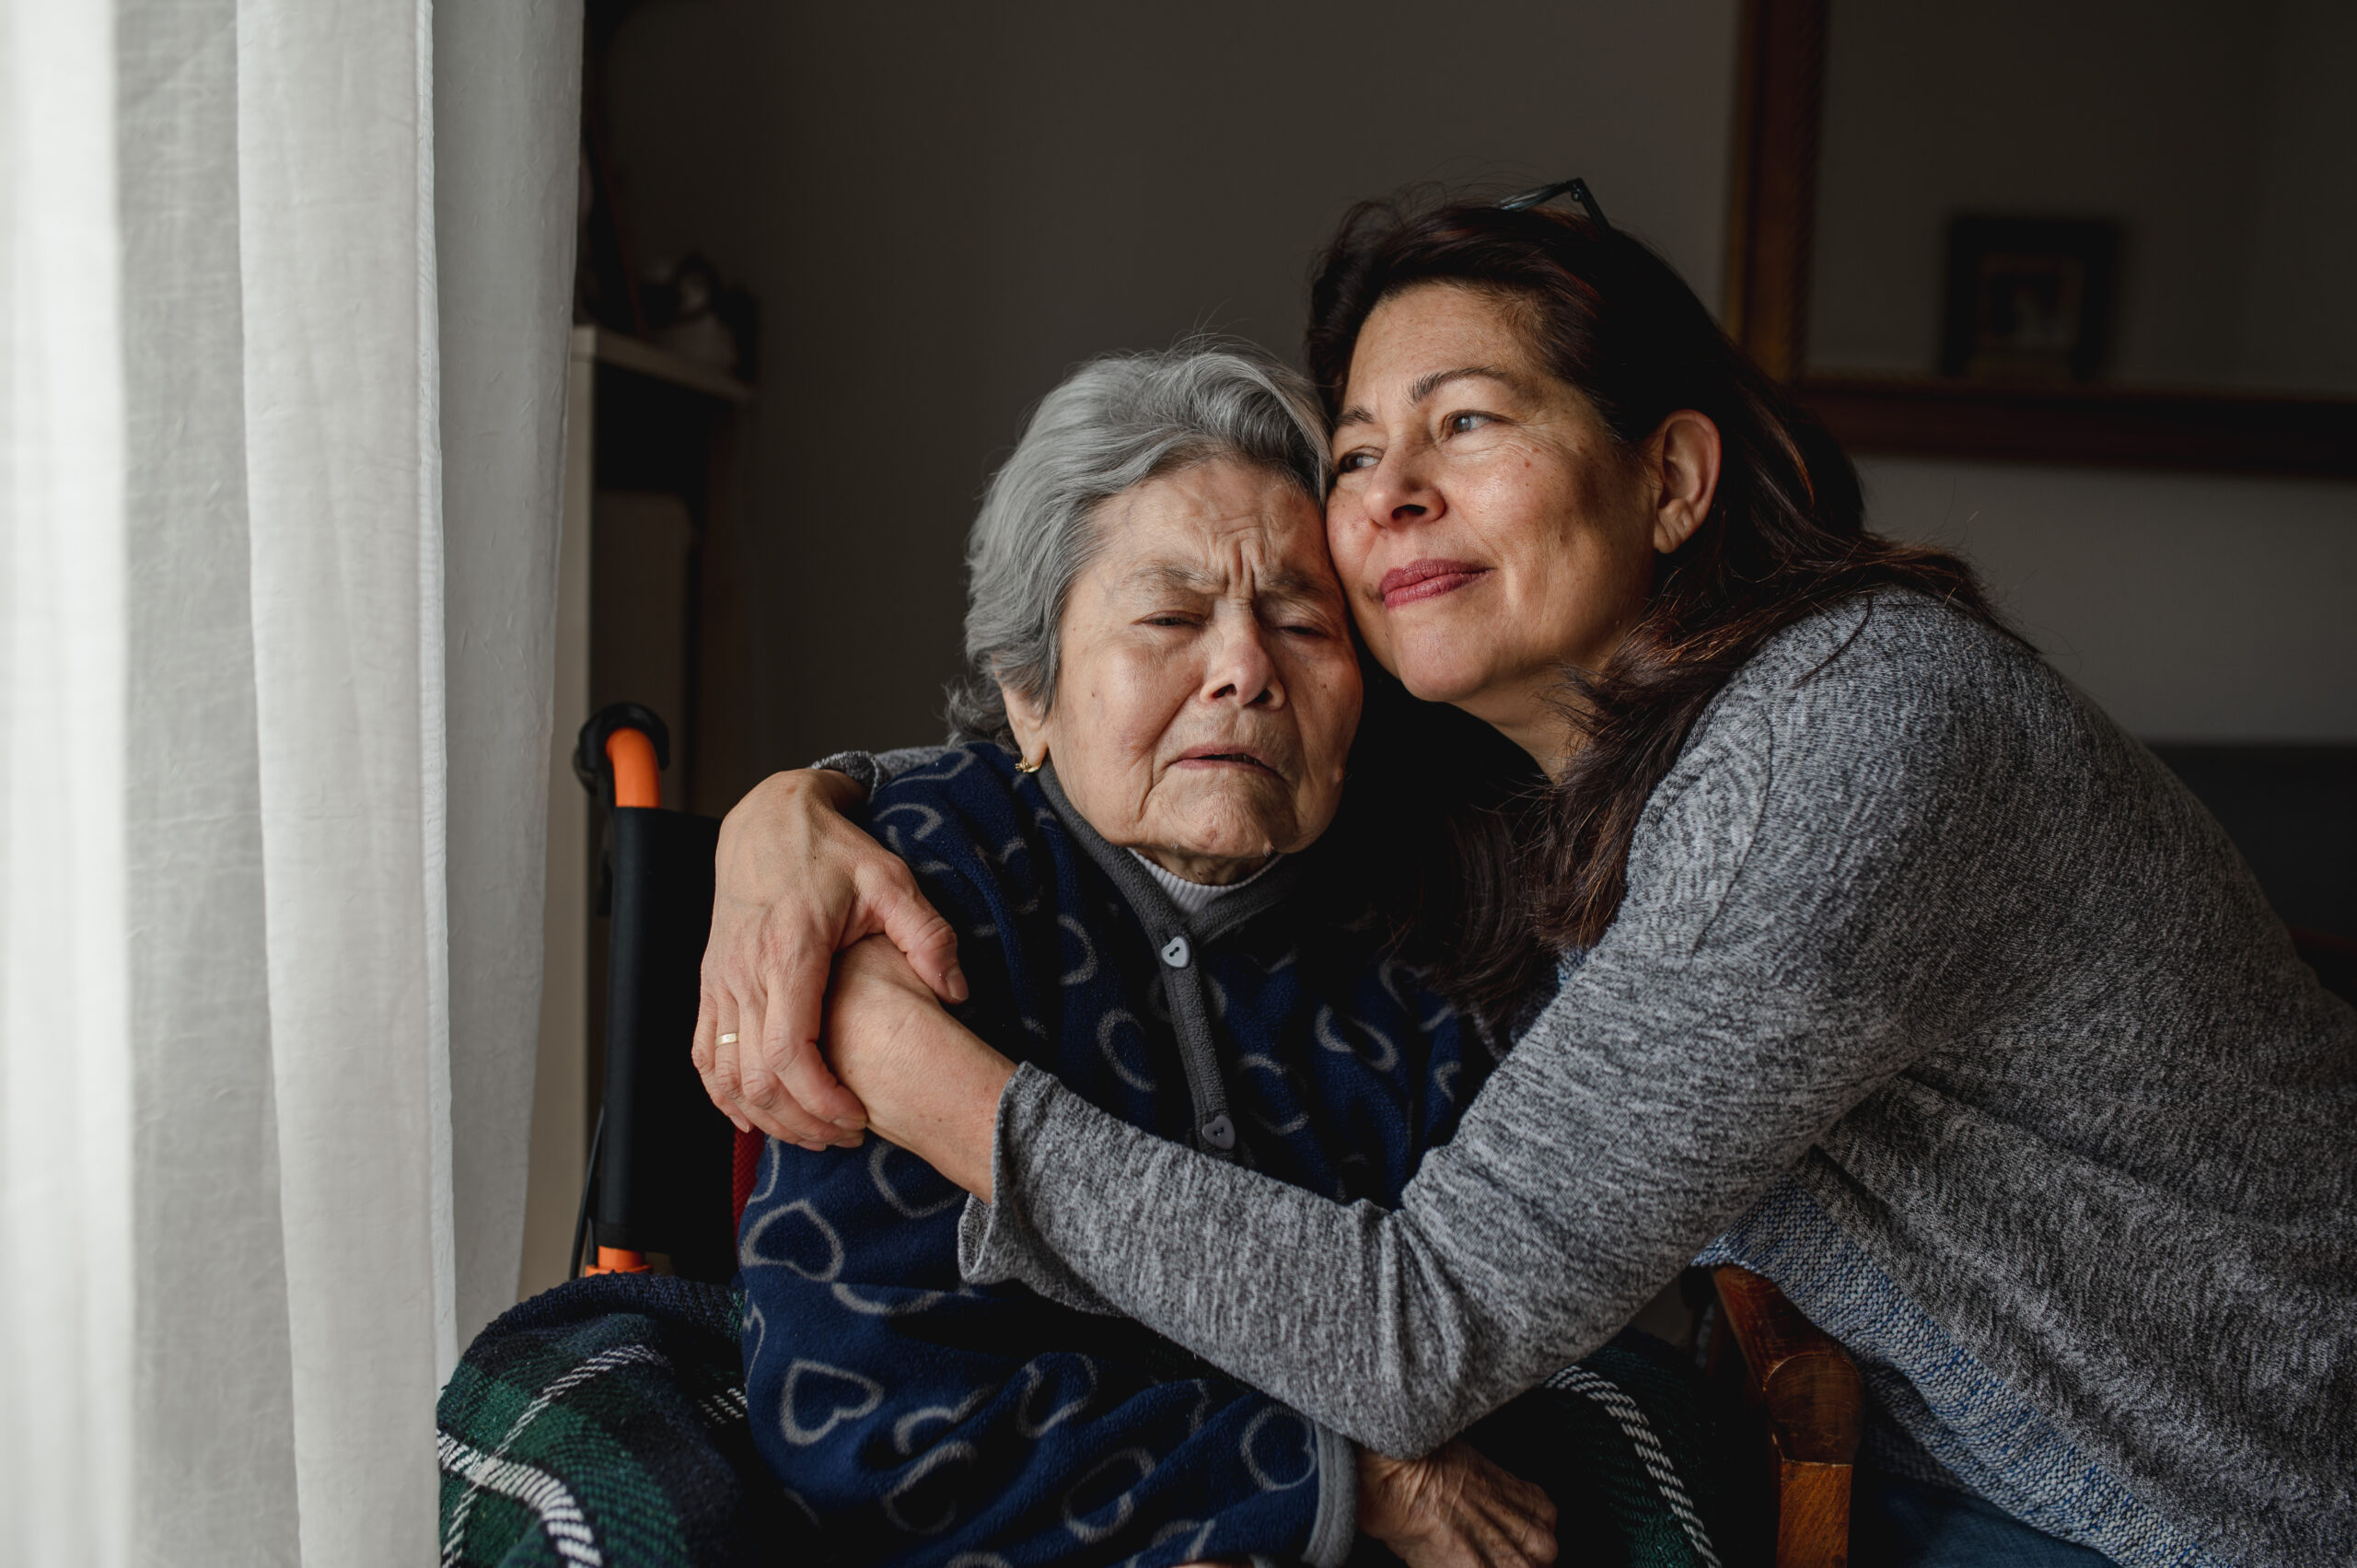 3 Strategies for Avoiding Burnout While Caring for an Elderly Relative